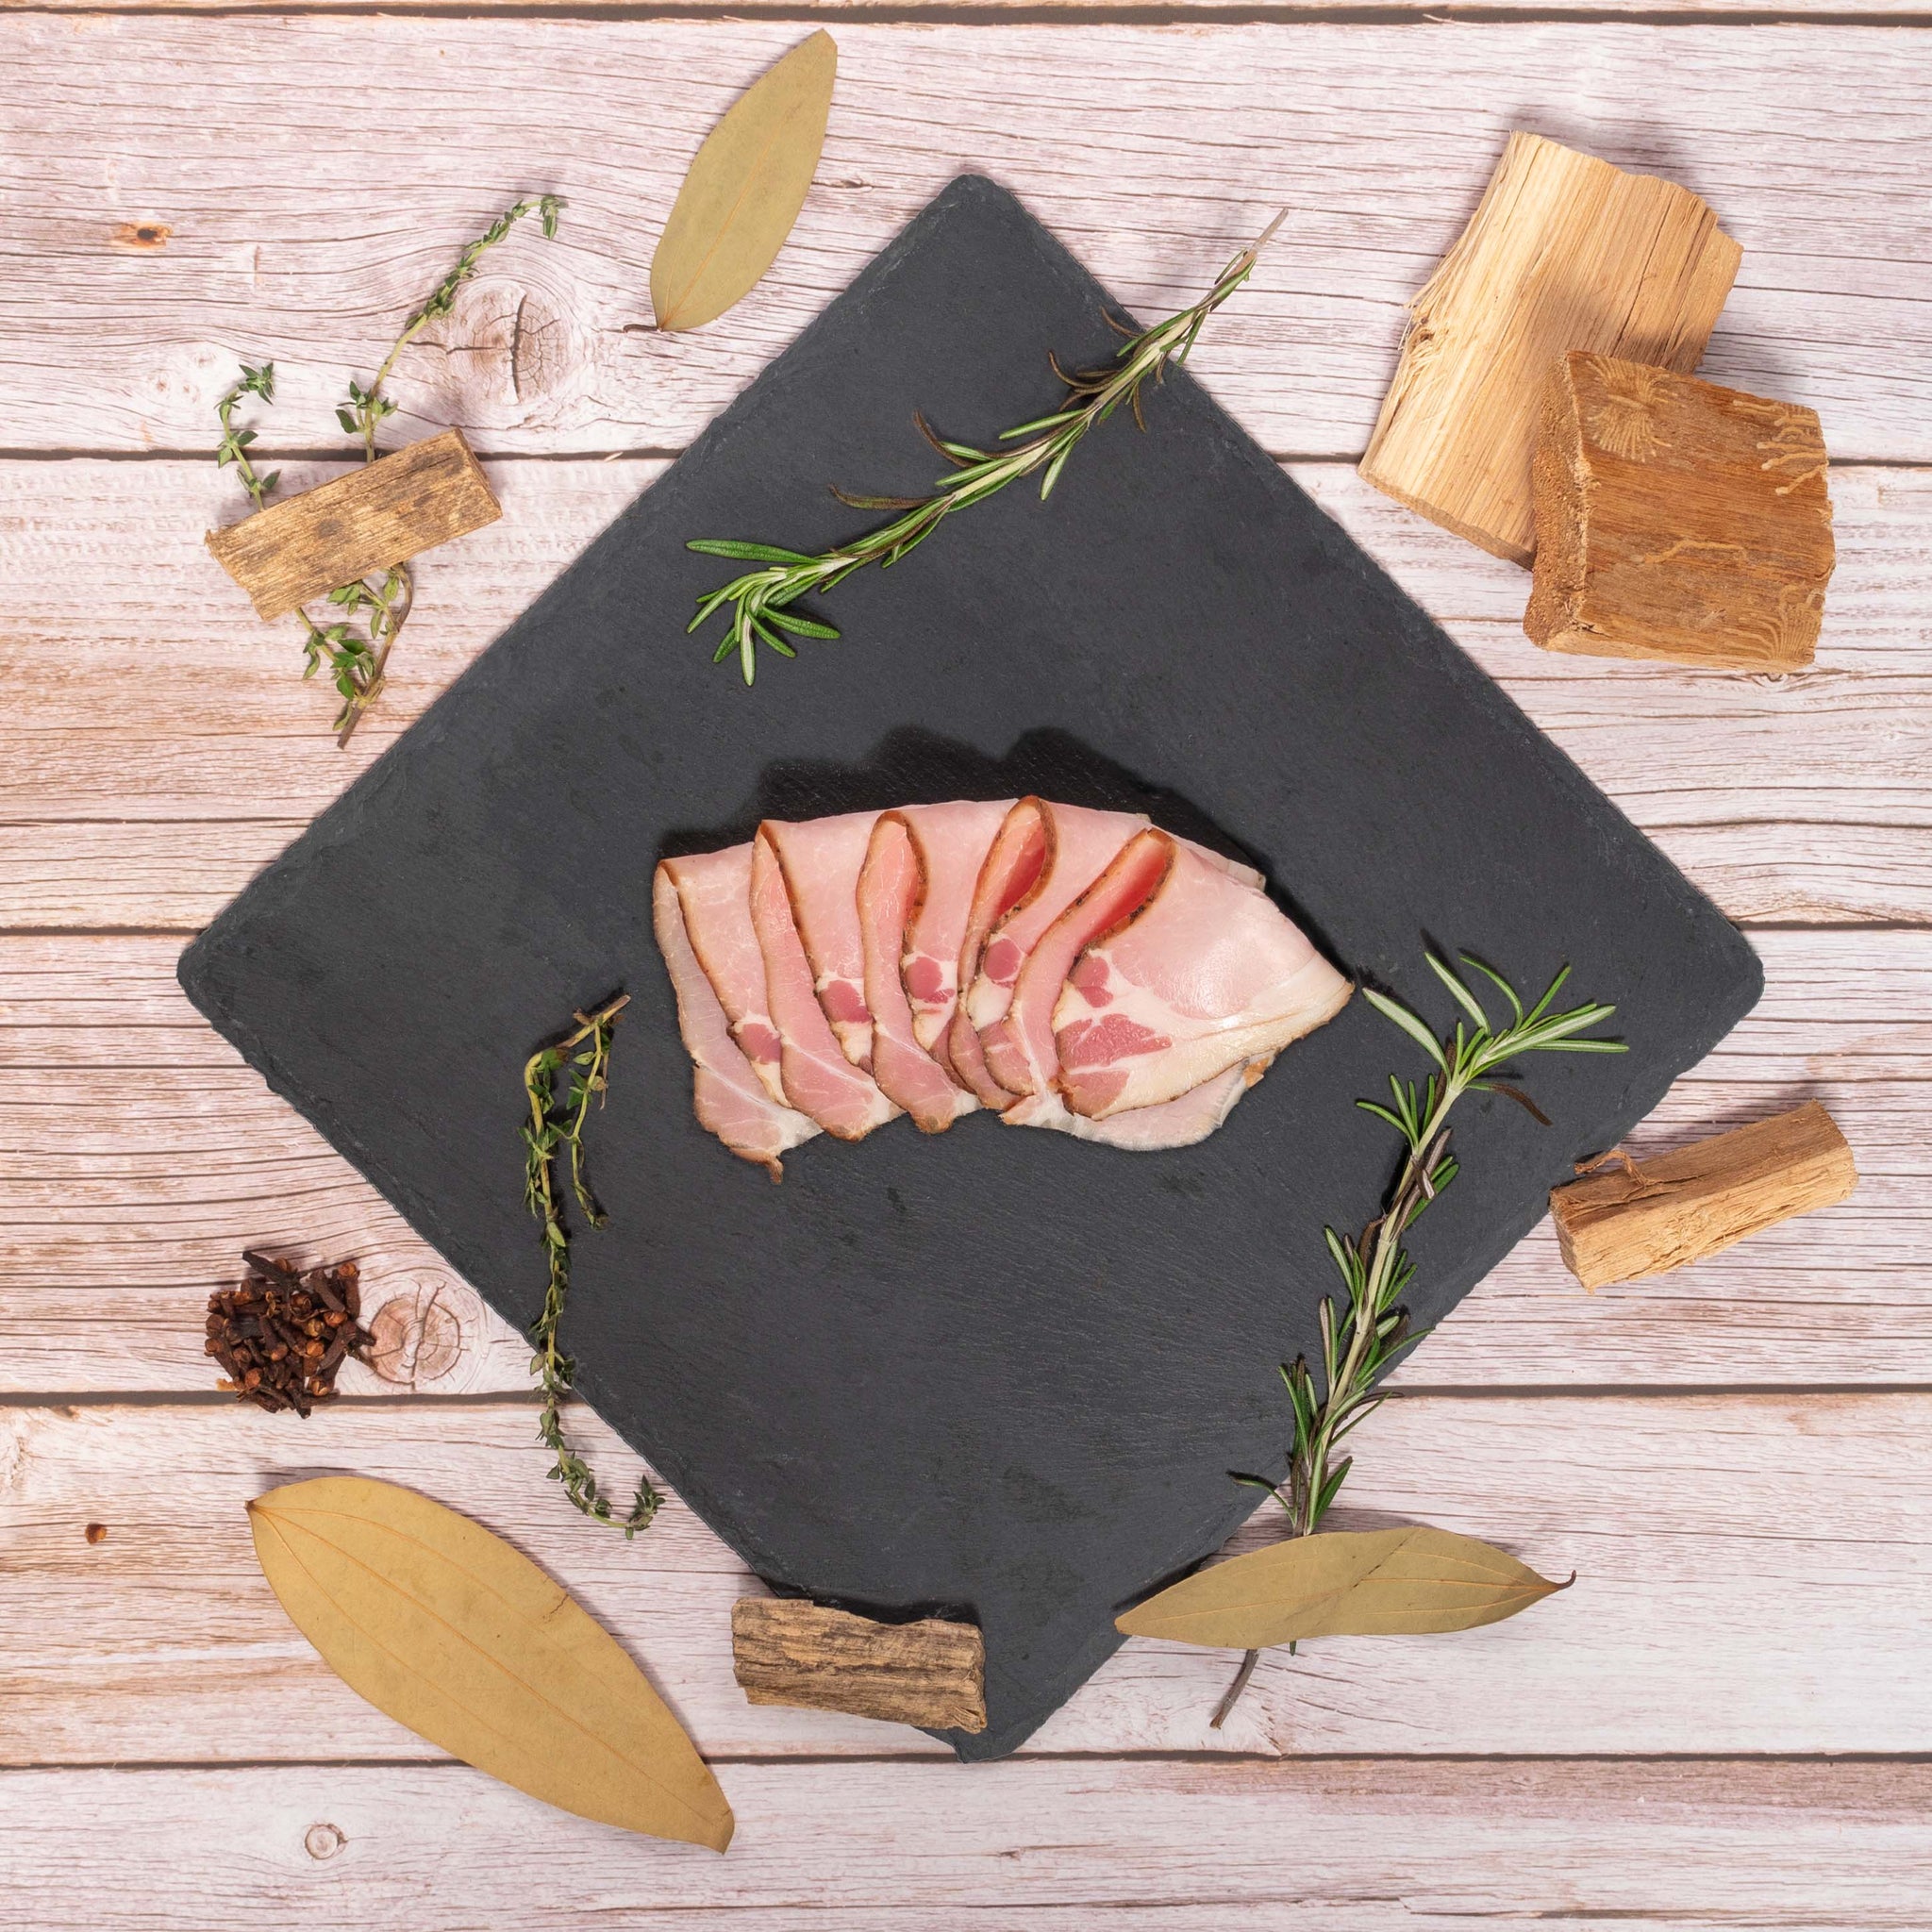 Slices of Specialty Smoked Ham on Stone Plate with Bay Leaves, Rosemary, Thyme, Cloves, Applewood chips decorating the side, against a marble background